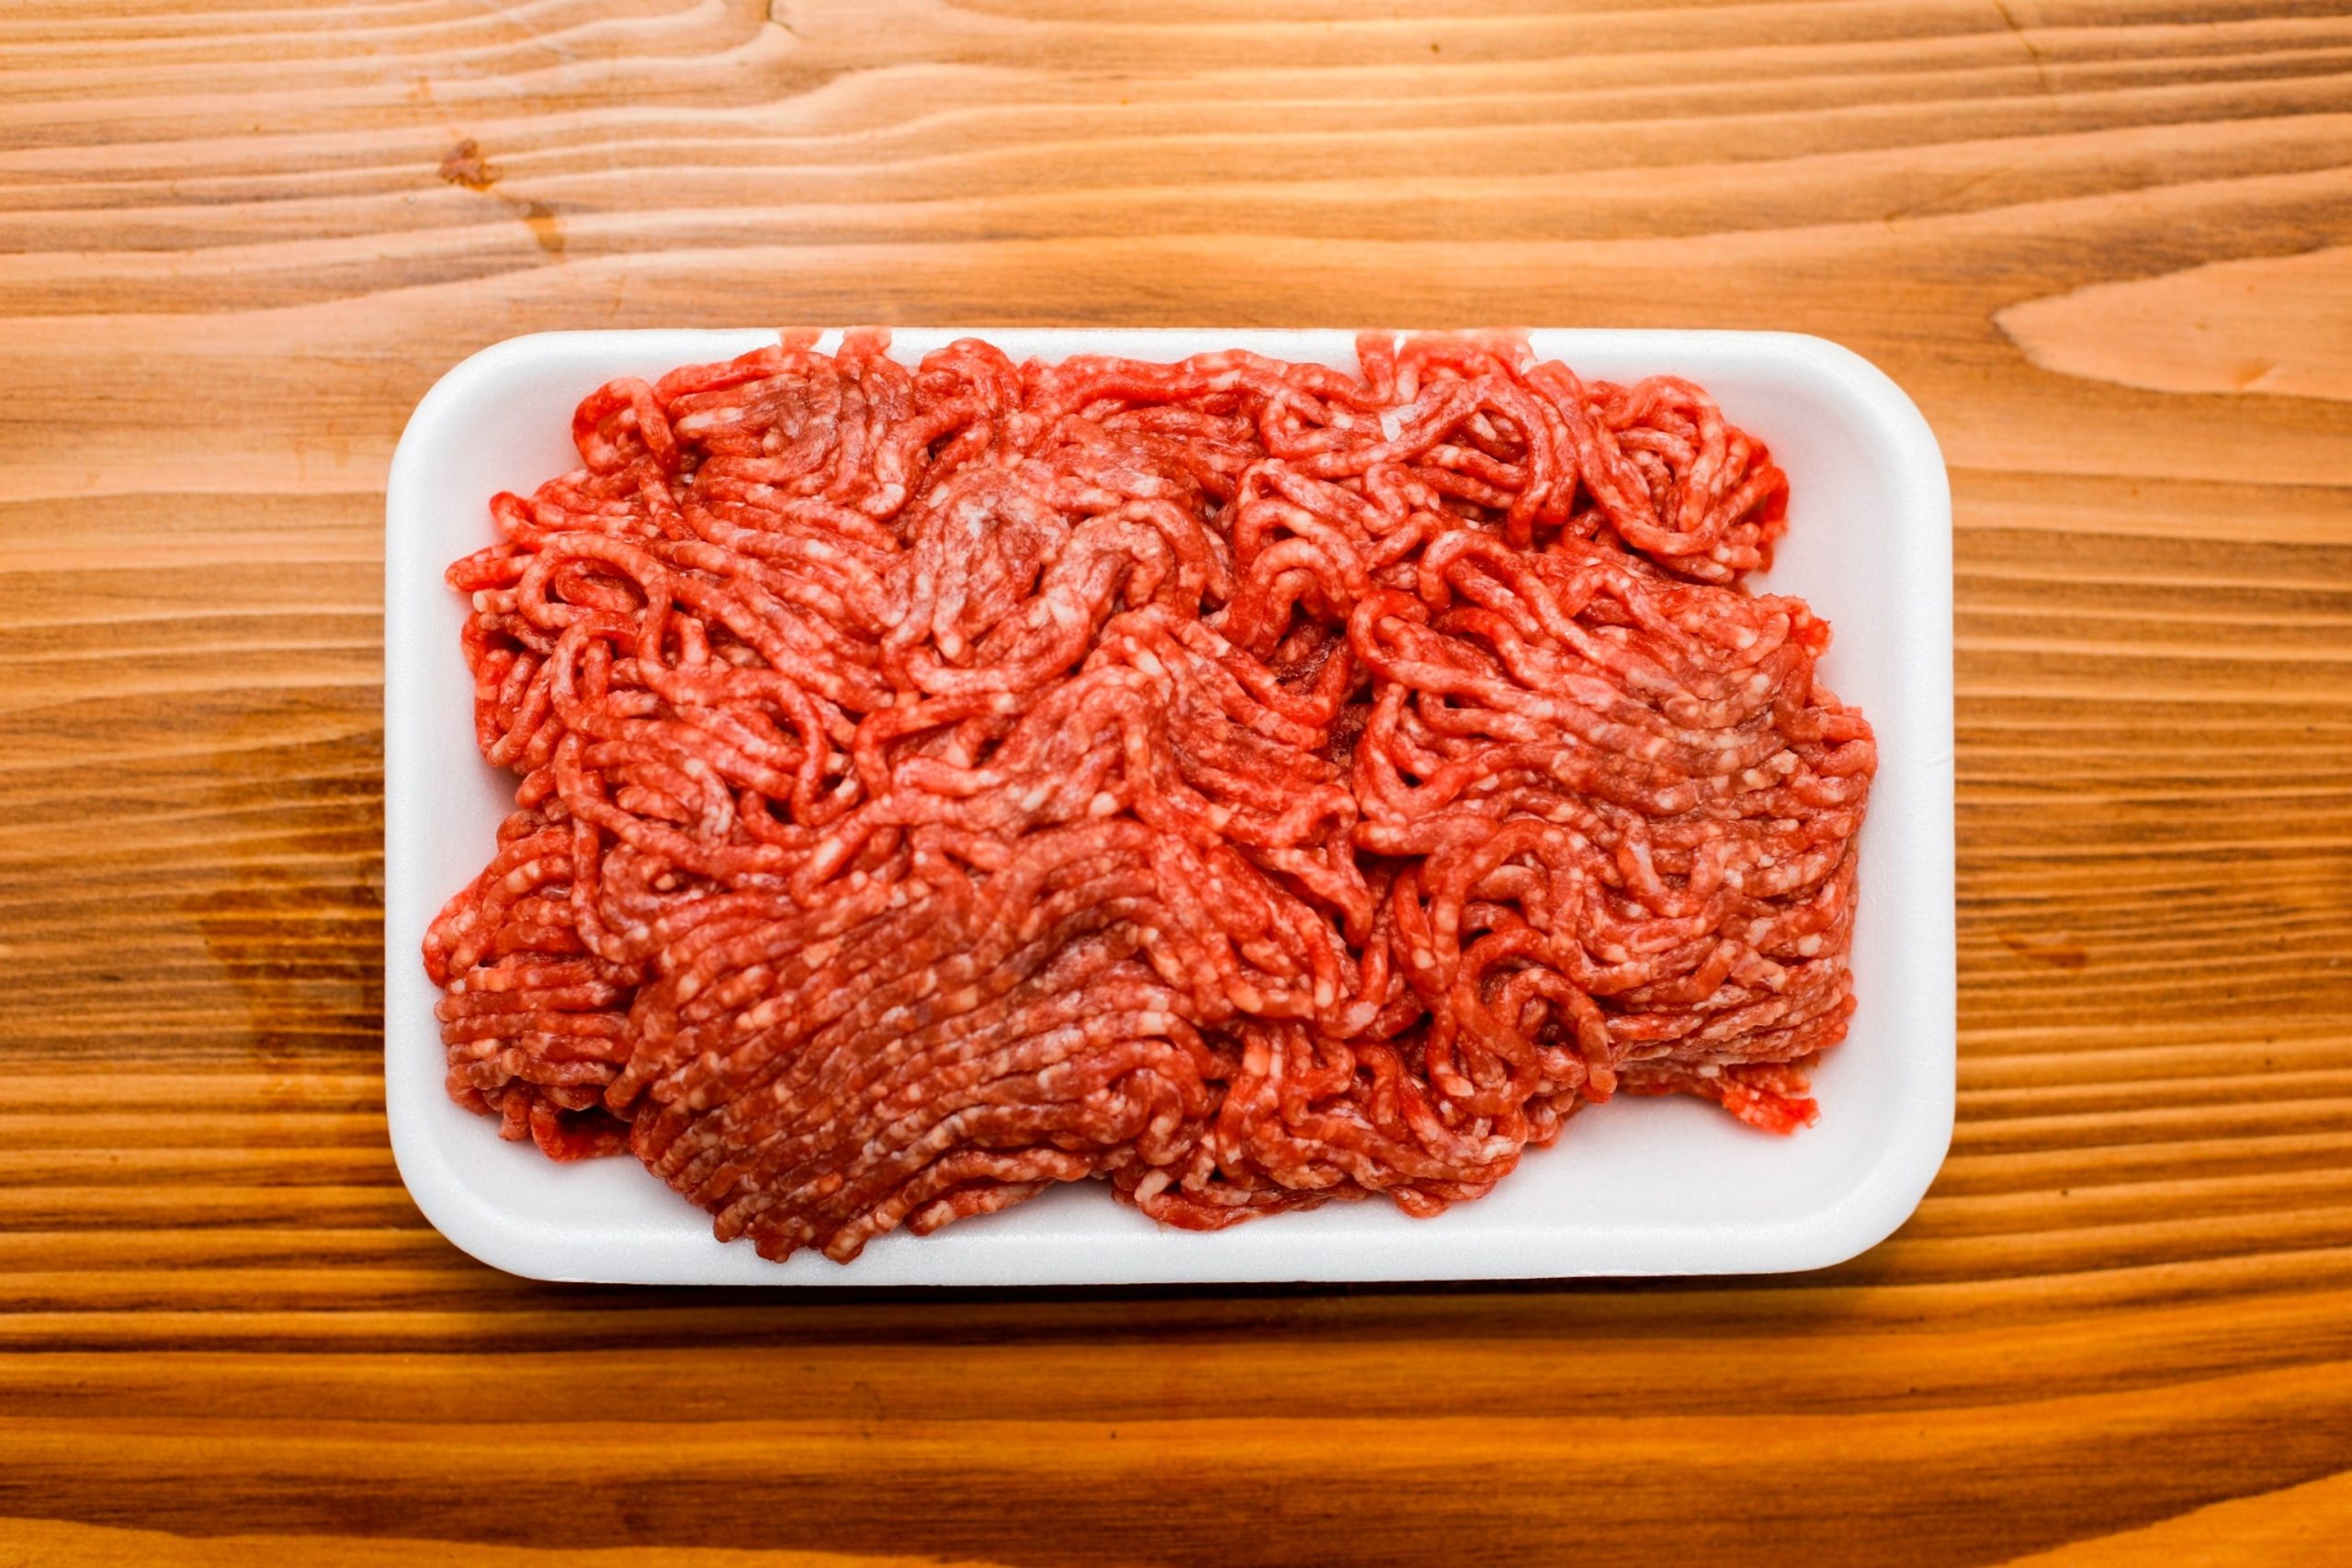 Recall Issued for Over 6,700 Pounds of Raw Ground Beef Amid E. coli Concerns